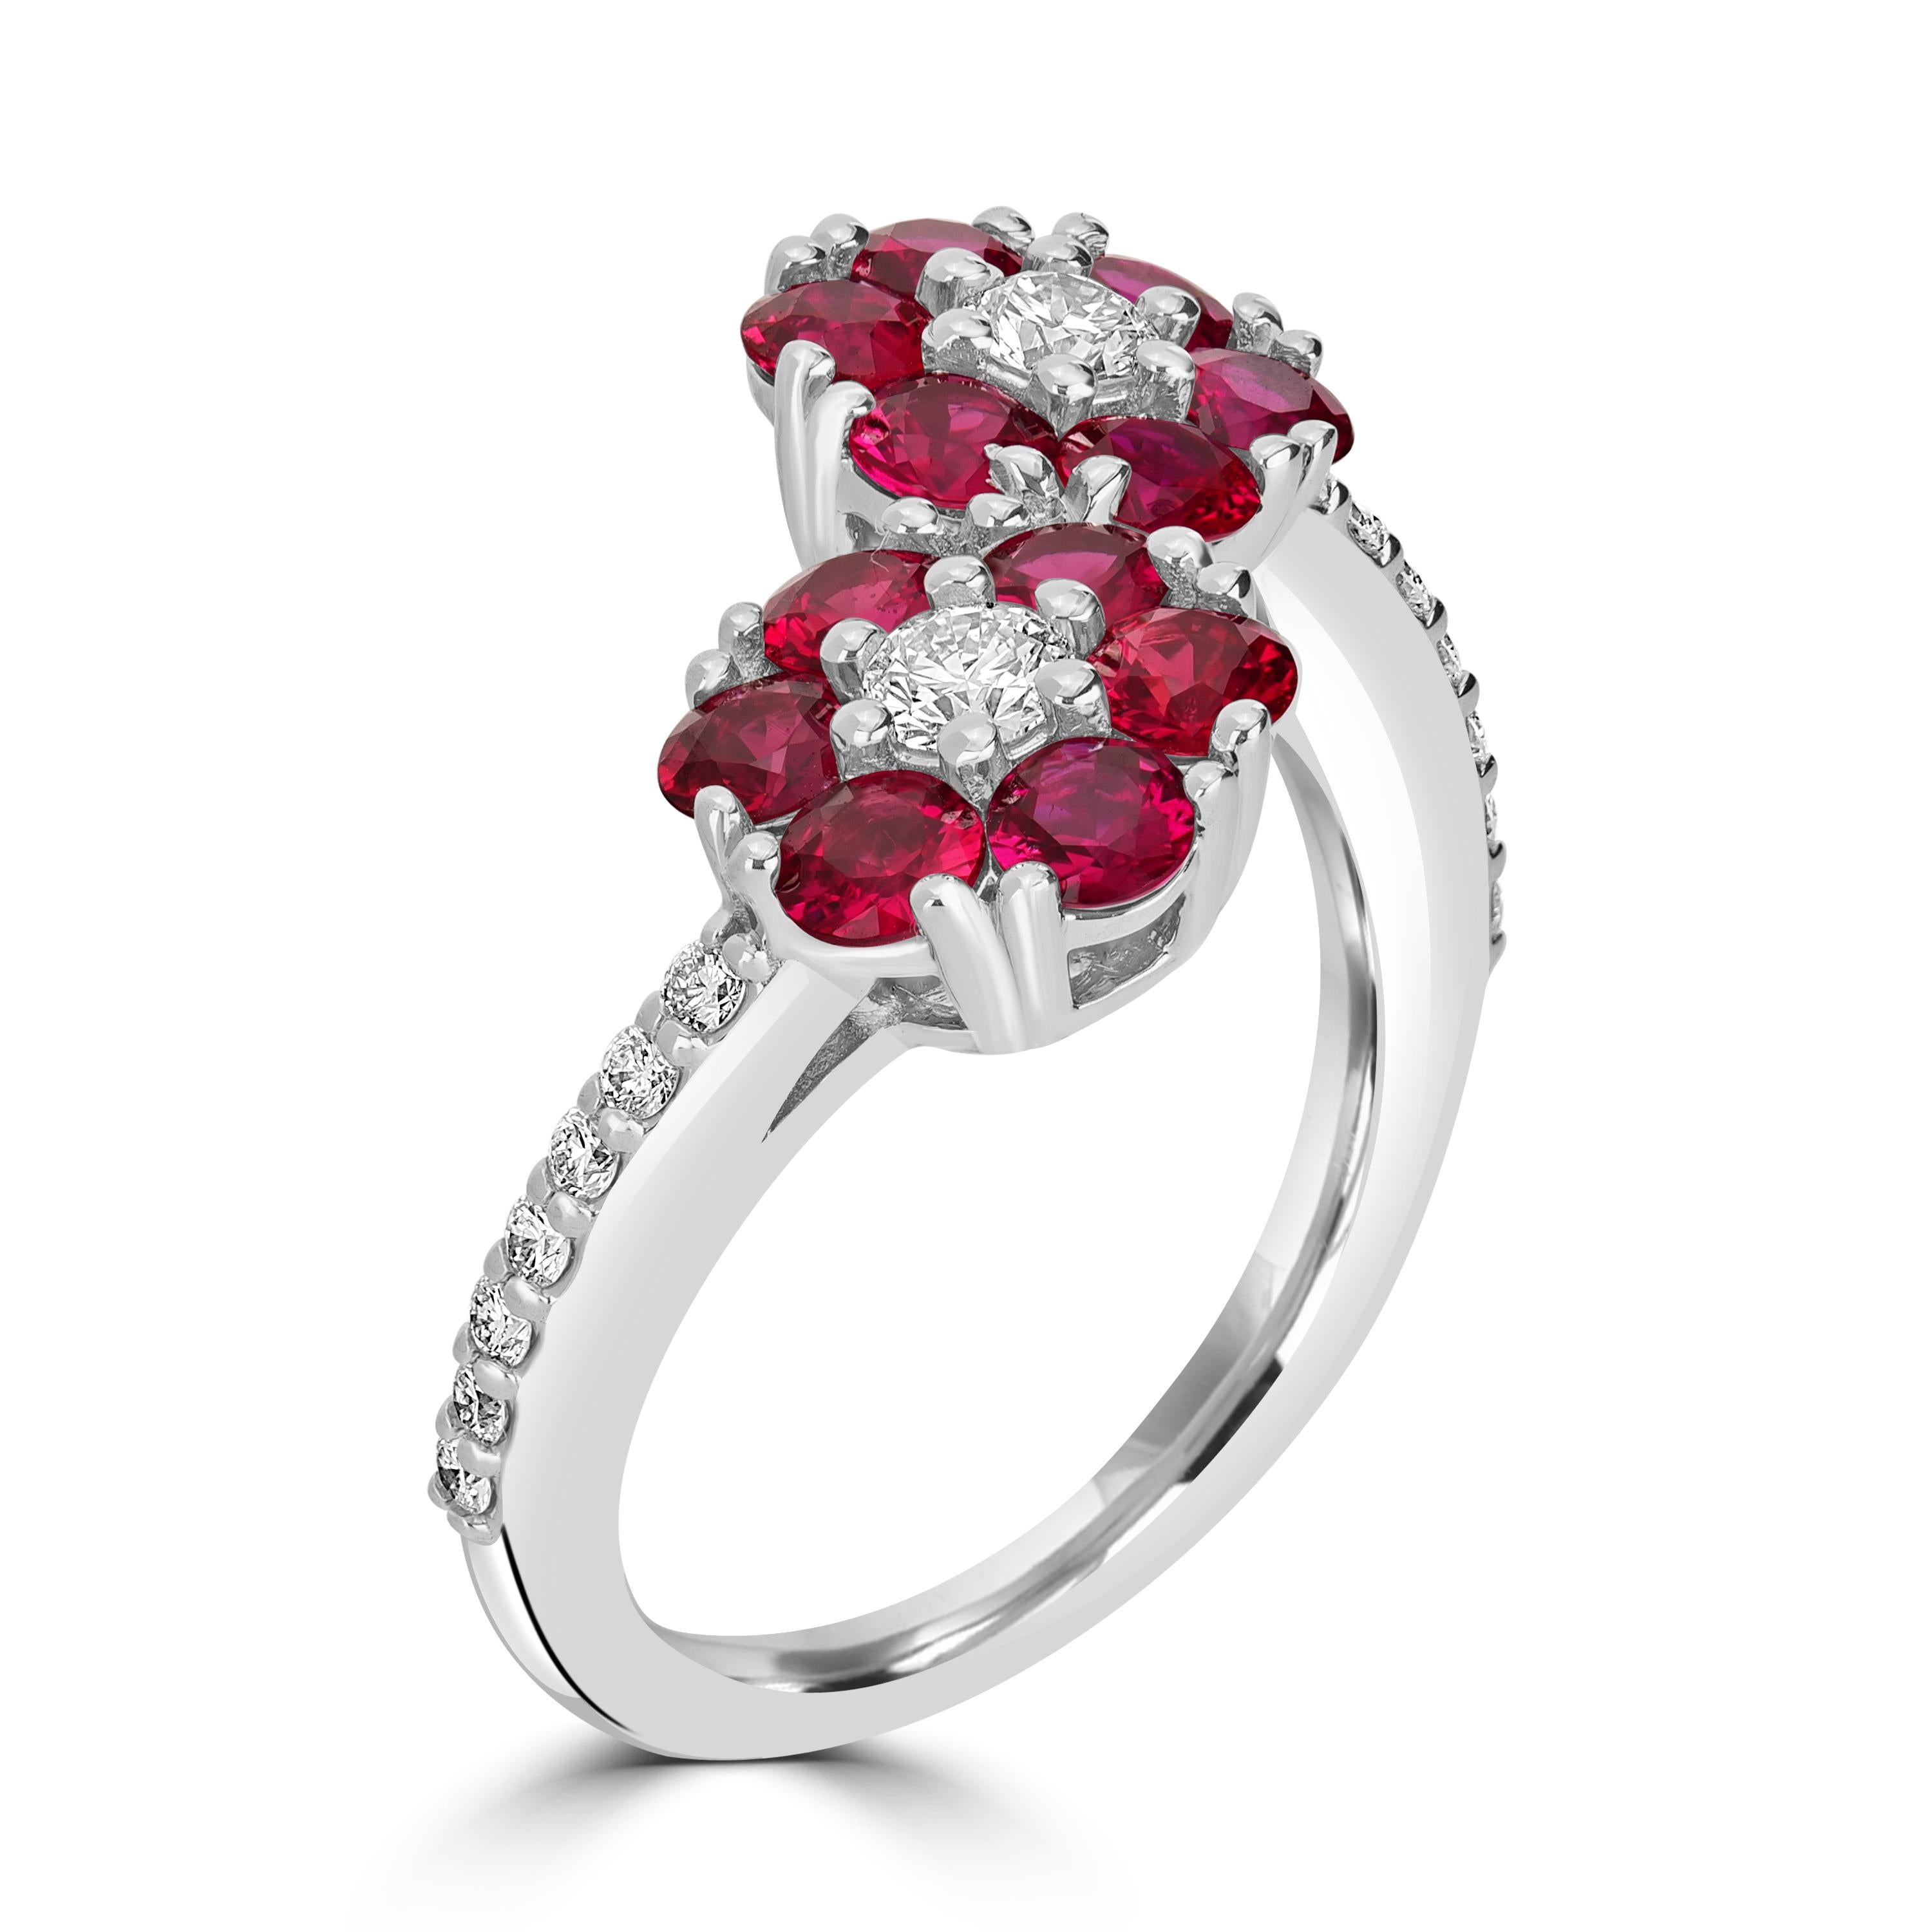 This beautiful ring consists of bright red round rubies and diamonds total 2.42 carats. This ring is made with delicacy and extreme care in the heart of New York City. The rubies are mined from Mozambique known for its vibrant pinkish red color and